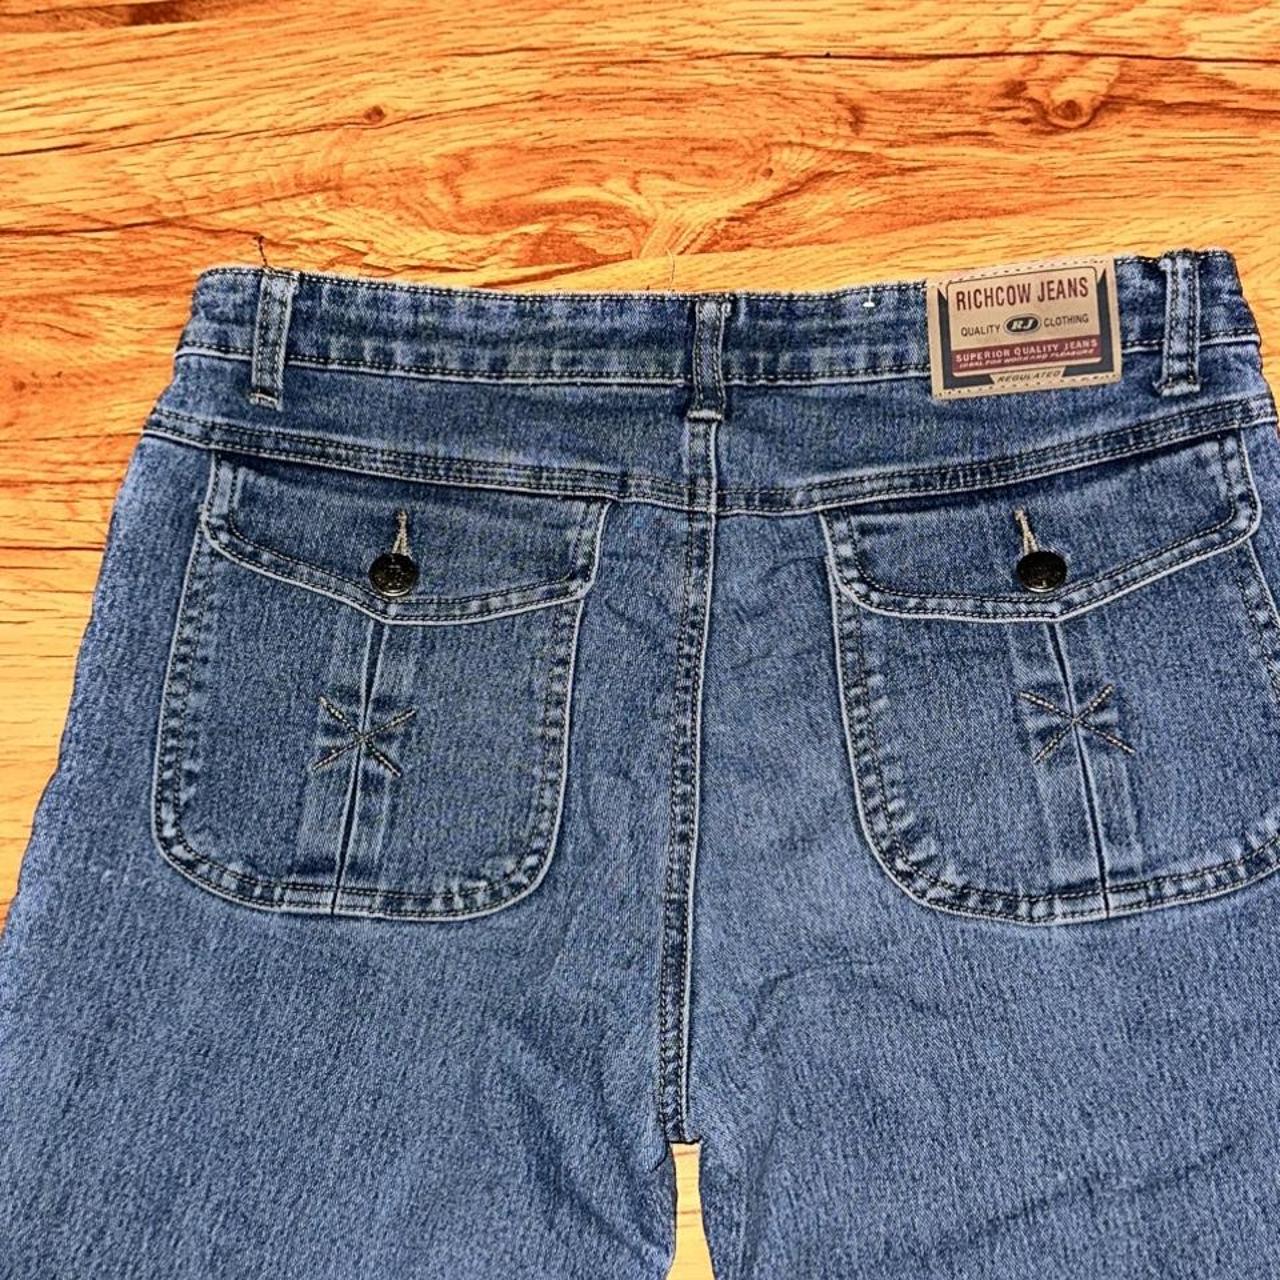 cool 90s jeans low rise and bootcut front has cool... - Depop